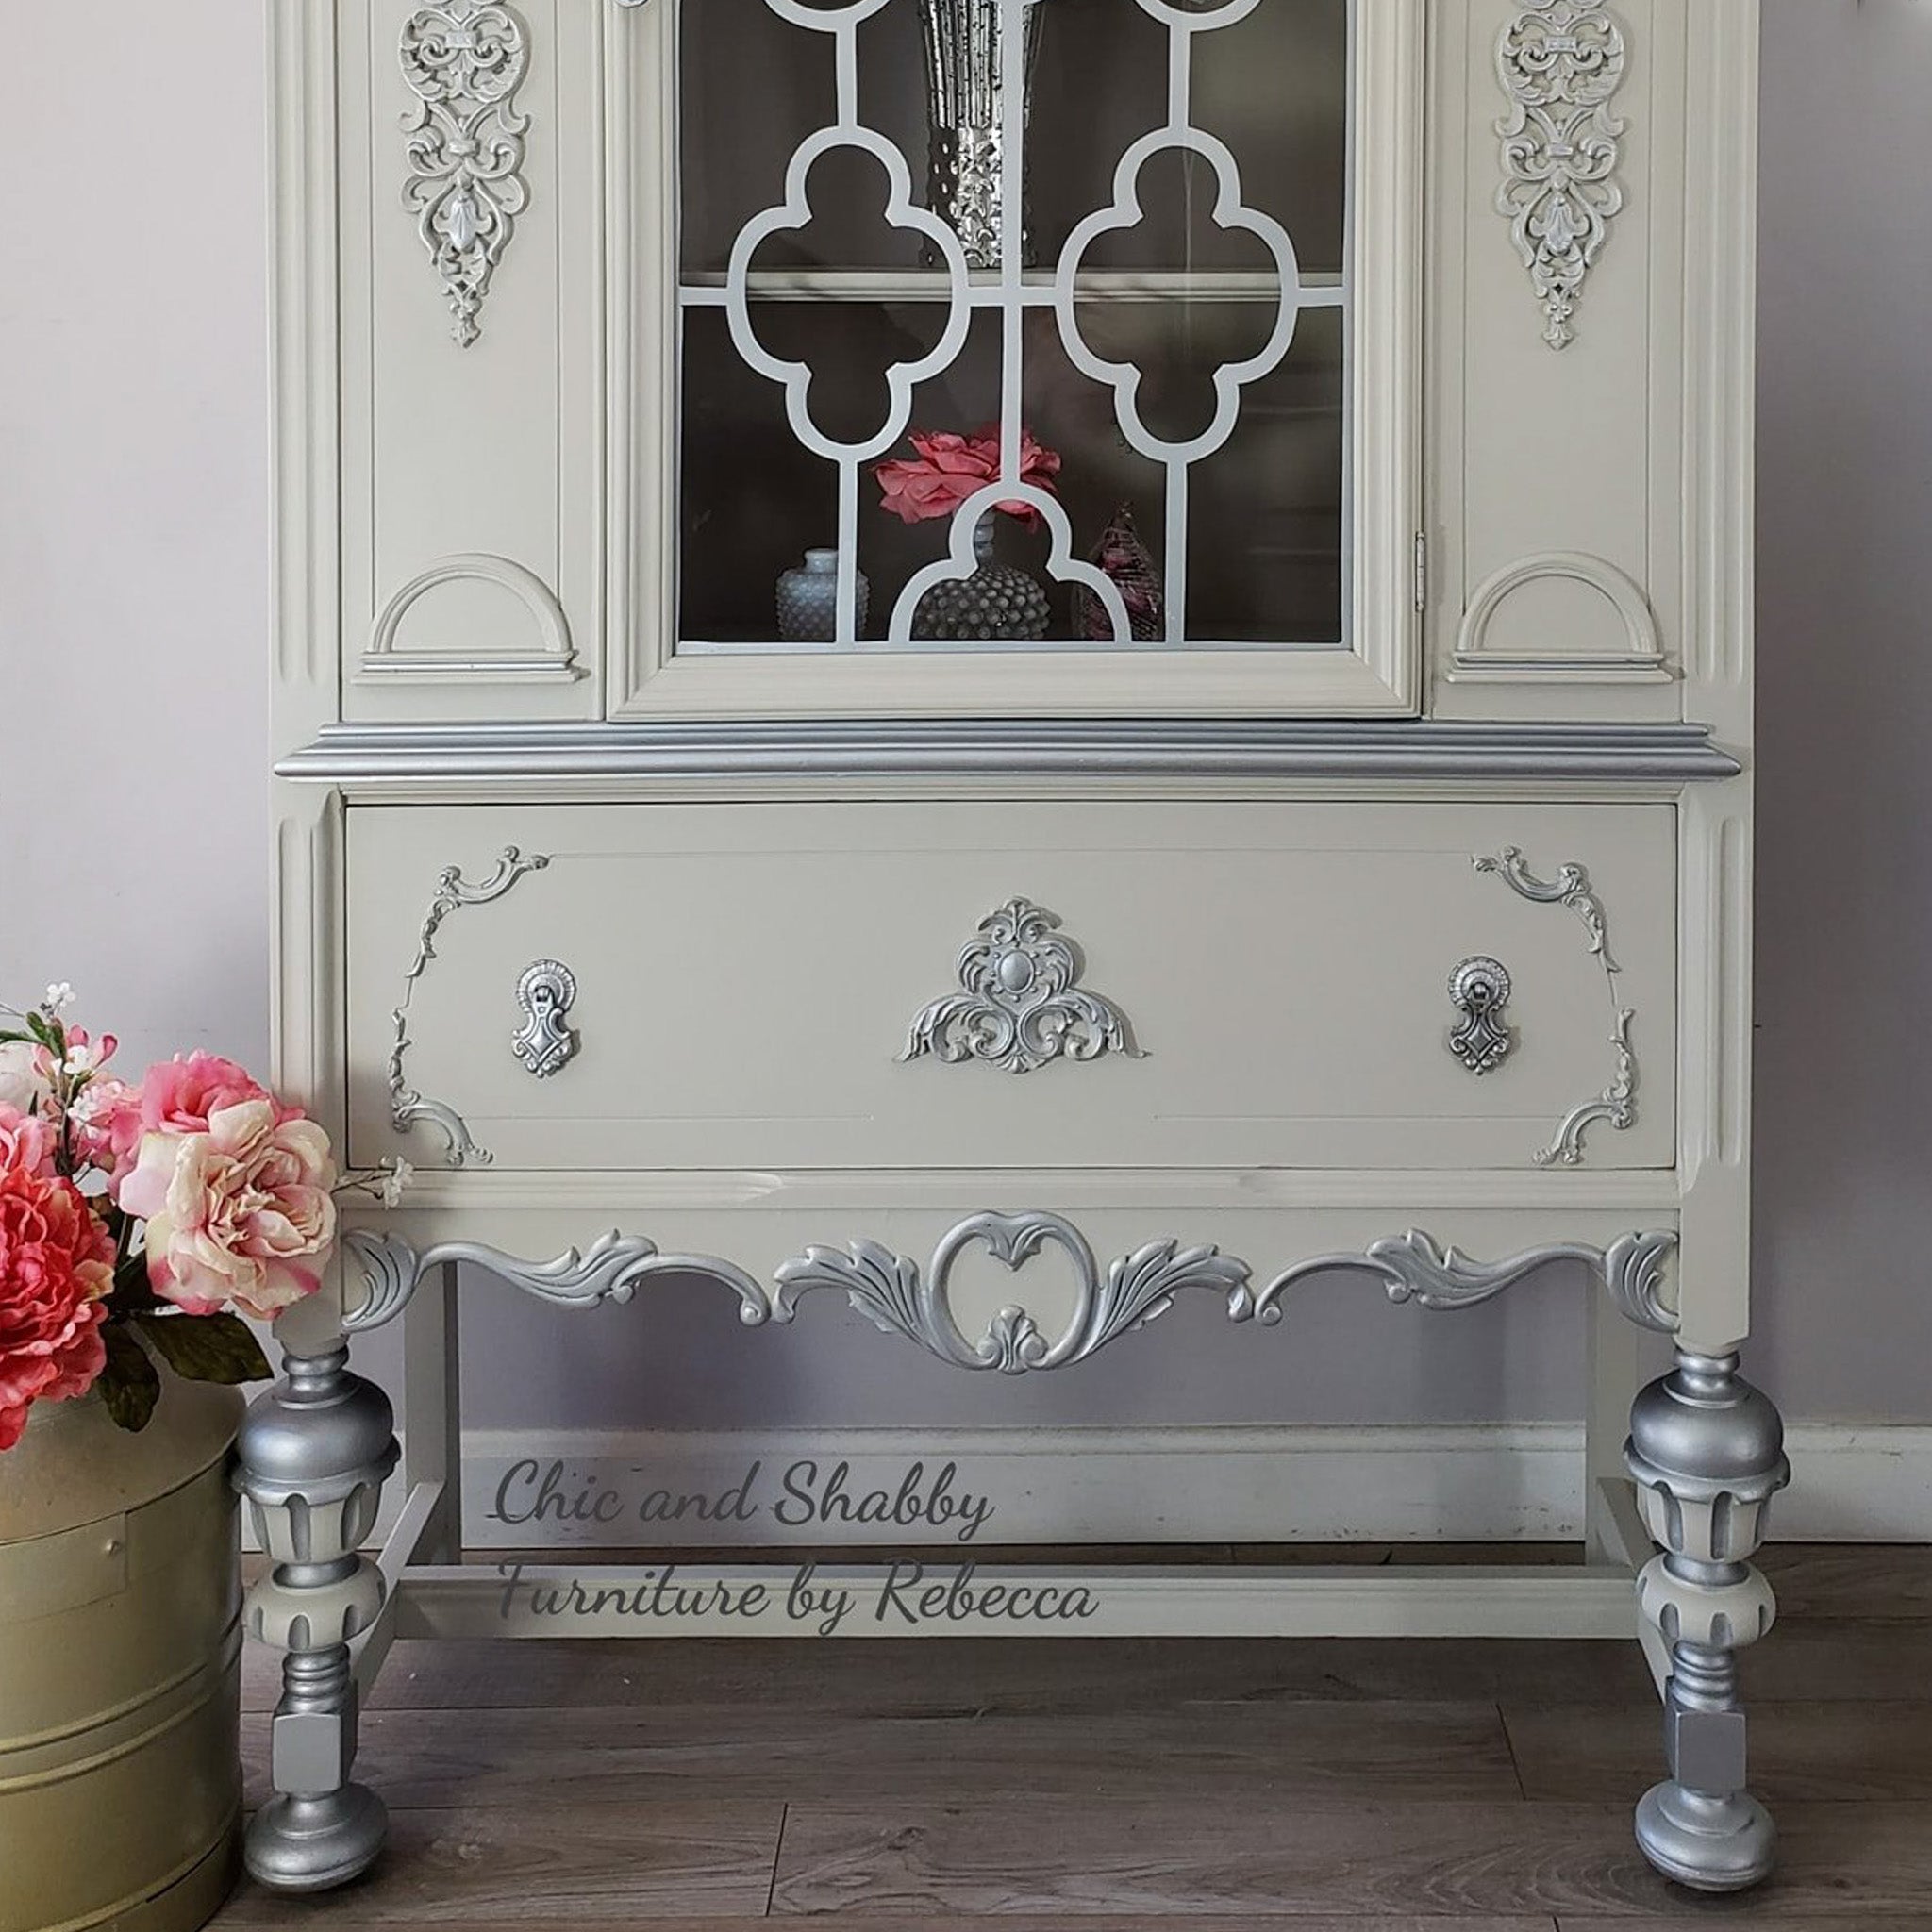 A vintage hutch refurbished by Chic and Shabby Furniture by Rebecca is painted in Dixie Belle's Sawmill Gravy chalk mineral paint.